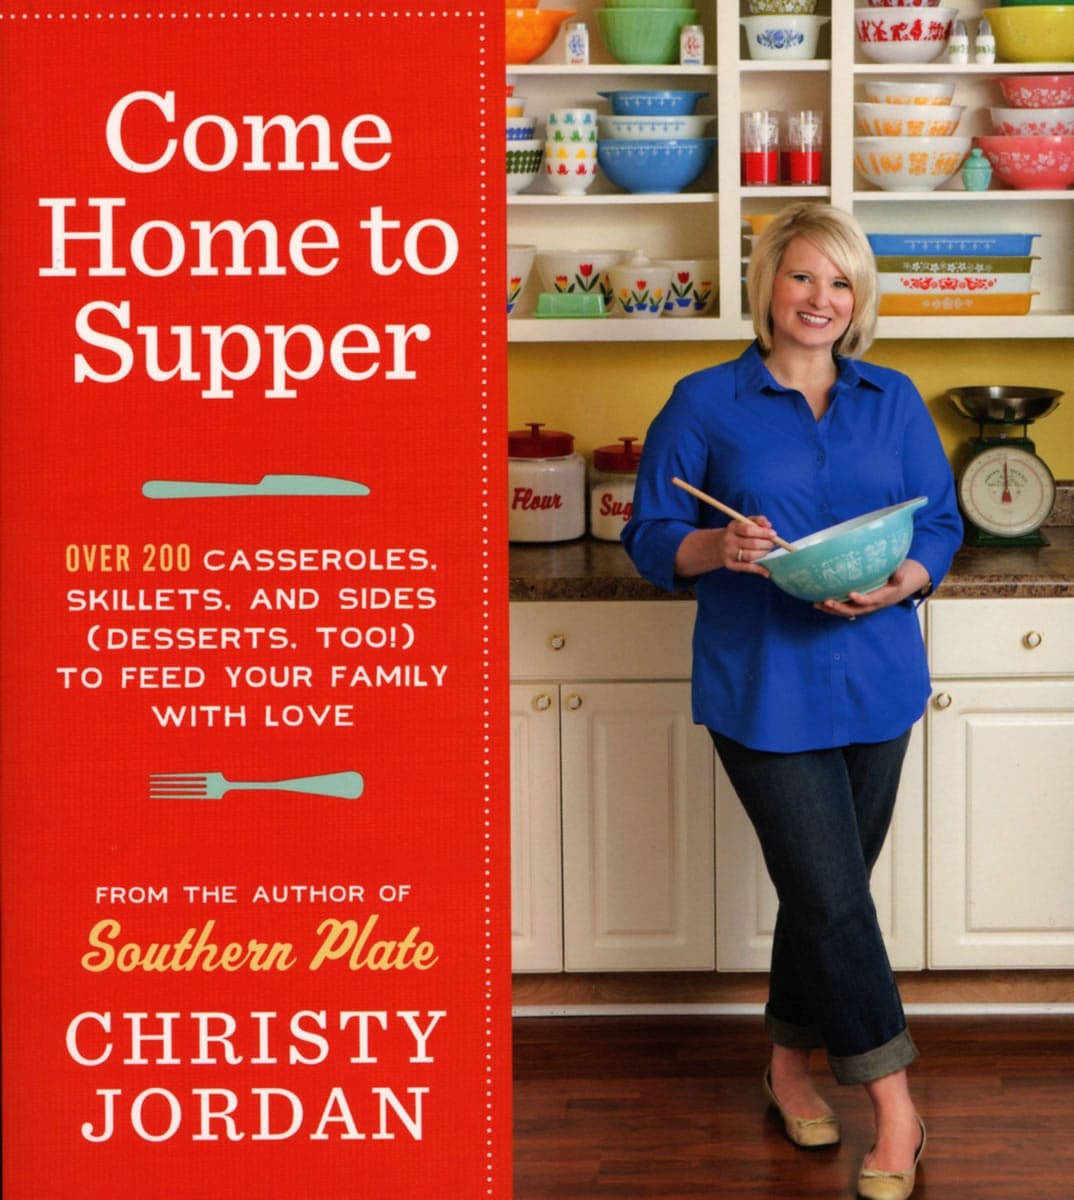 Christy Jordan has written the cookbook for anyone who has ever asked &quot;Whatis for supper?&quot; An easy-to-make taco casserole is a tasty place to start.